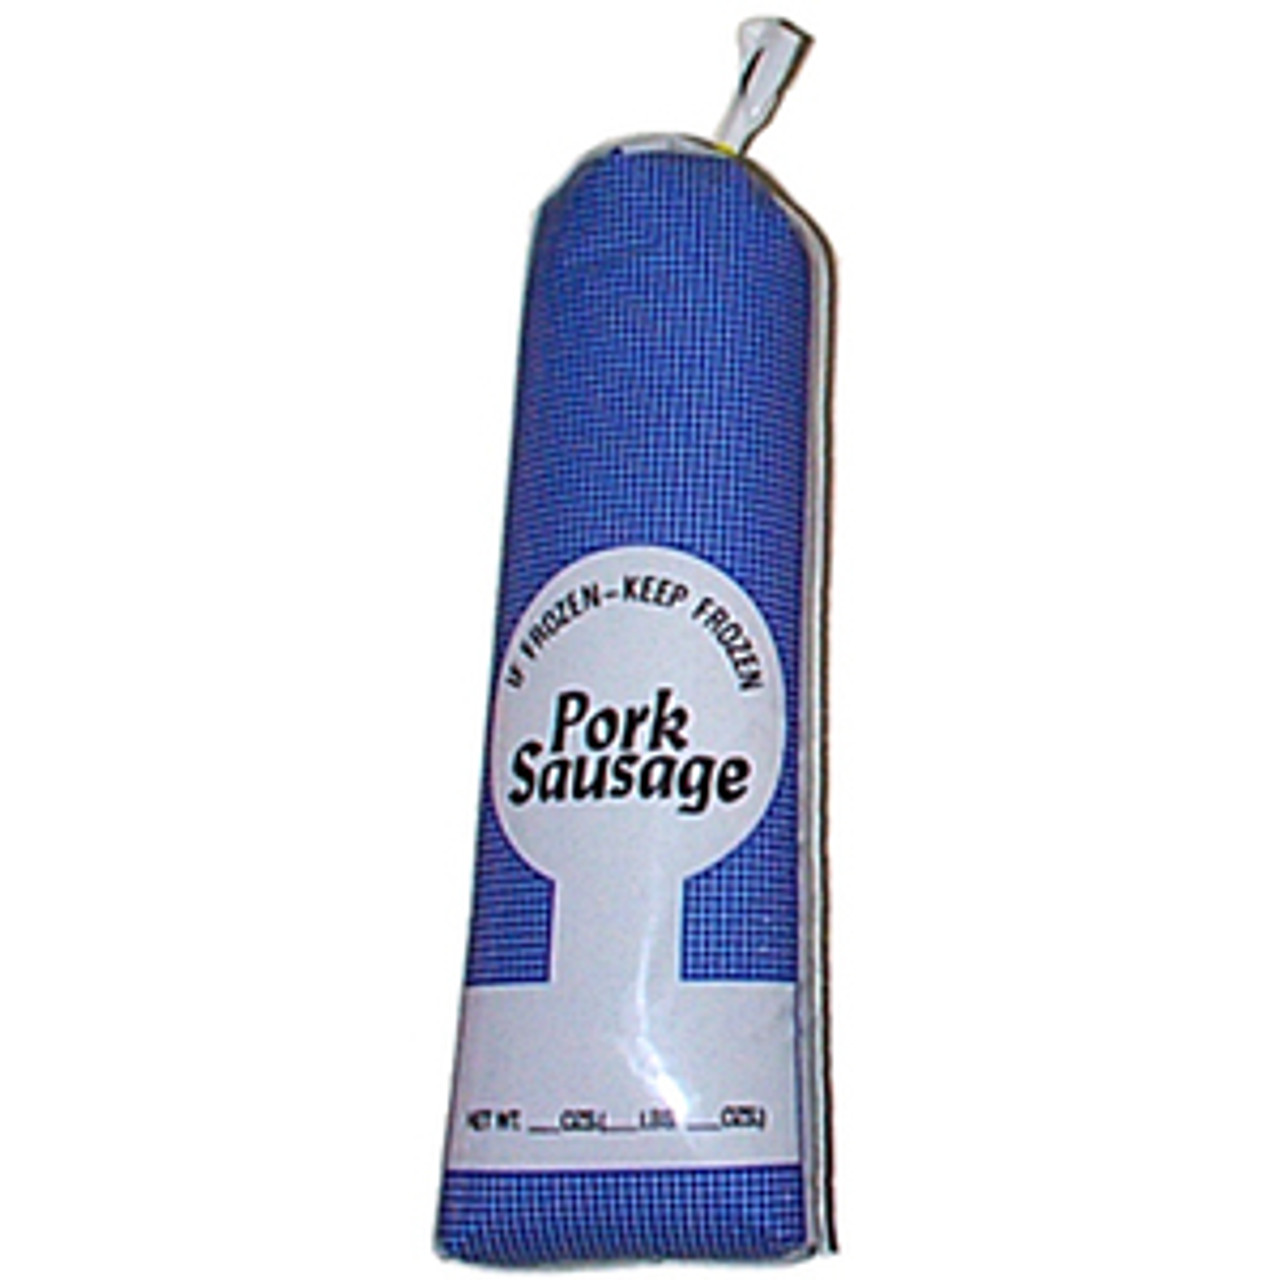 1 lb Pork Sausage White Poly Bags "Not for Sale" 100 Count.